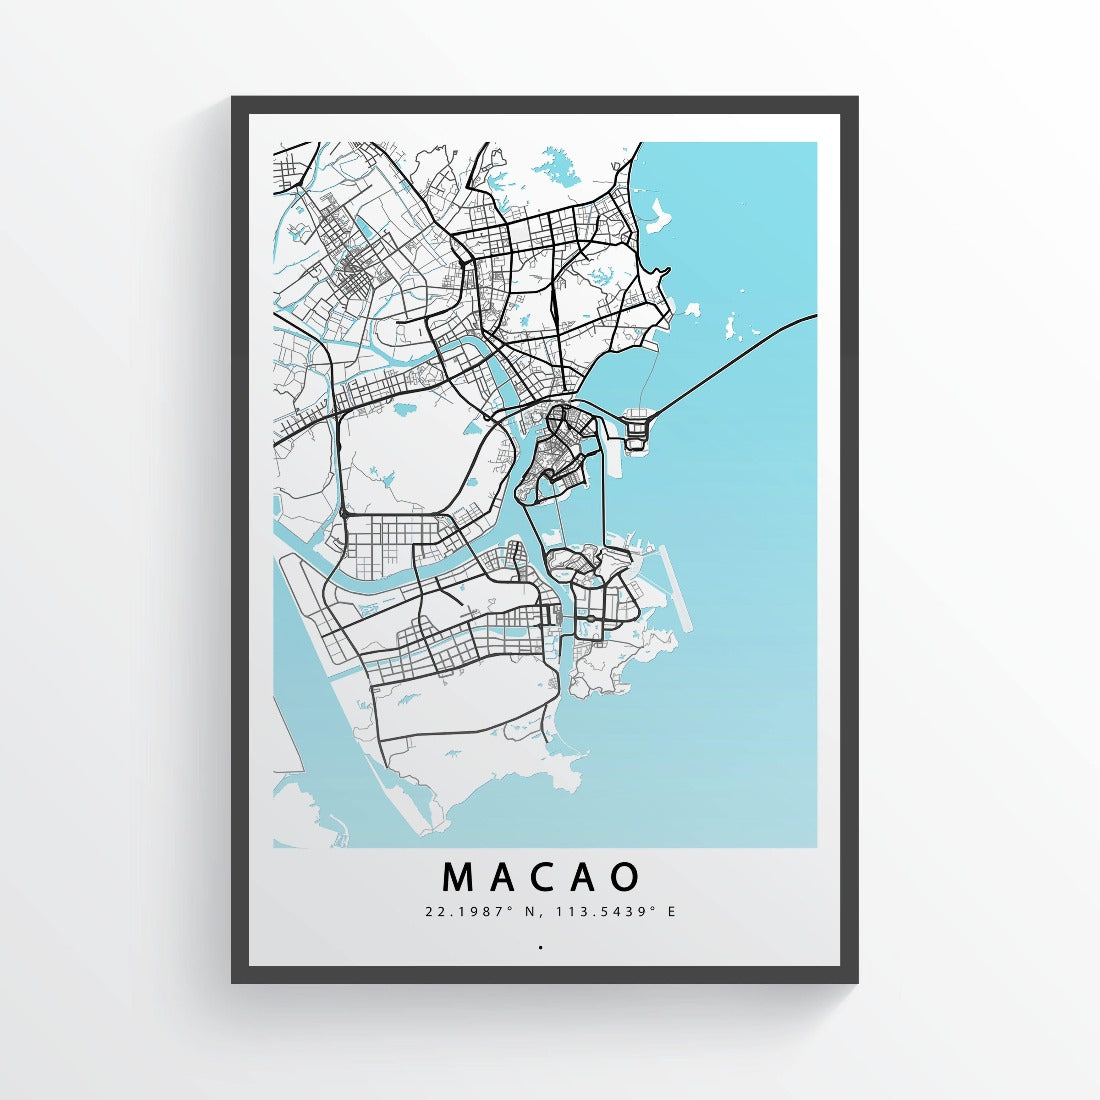 Plan your next getaway with this stylish map print. Wanderlust-inducing and geographically captivating, this map print of Macao City is perfect for the jetsetter and travel enthusiast. With a sleek and modern esthetic, this print is a great way to show off your love for far-off destinations. Add a touch of wanderlust to your walls with this captivating map print.